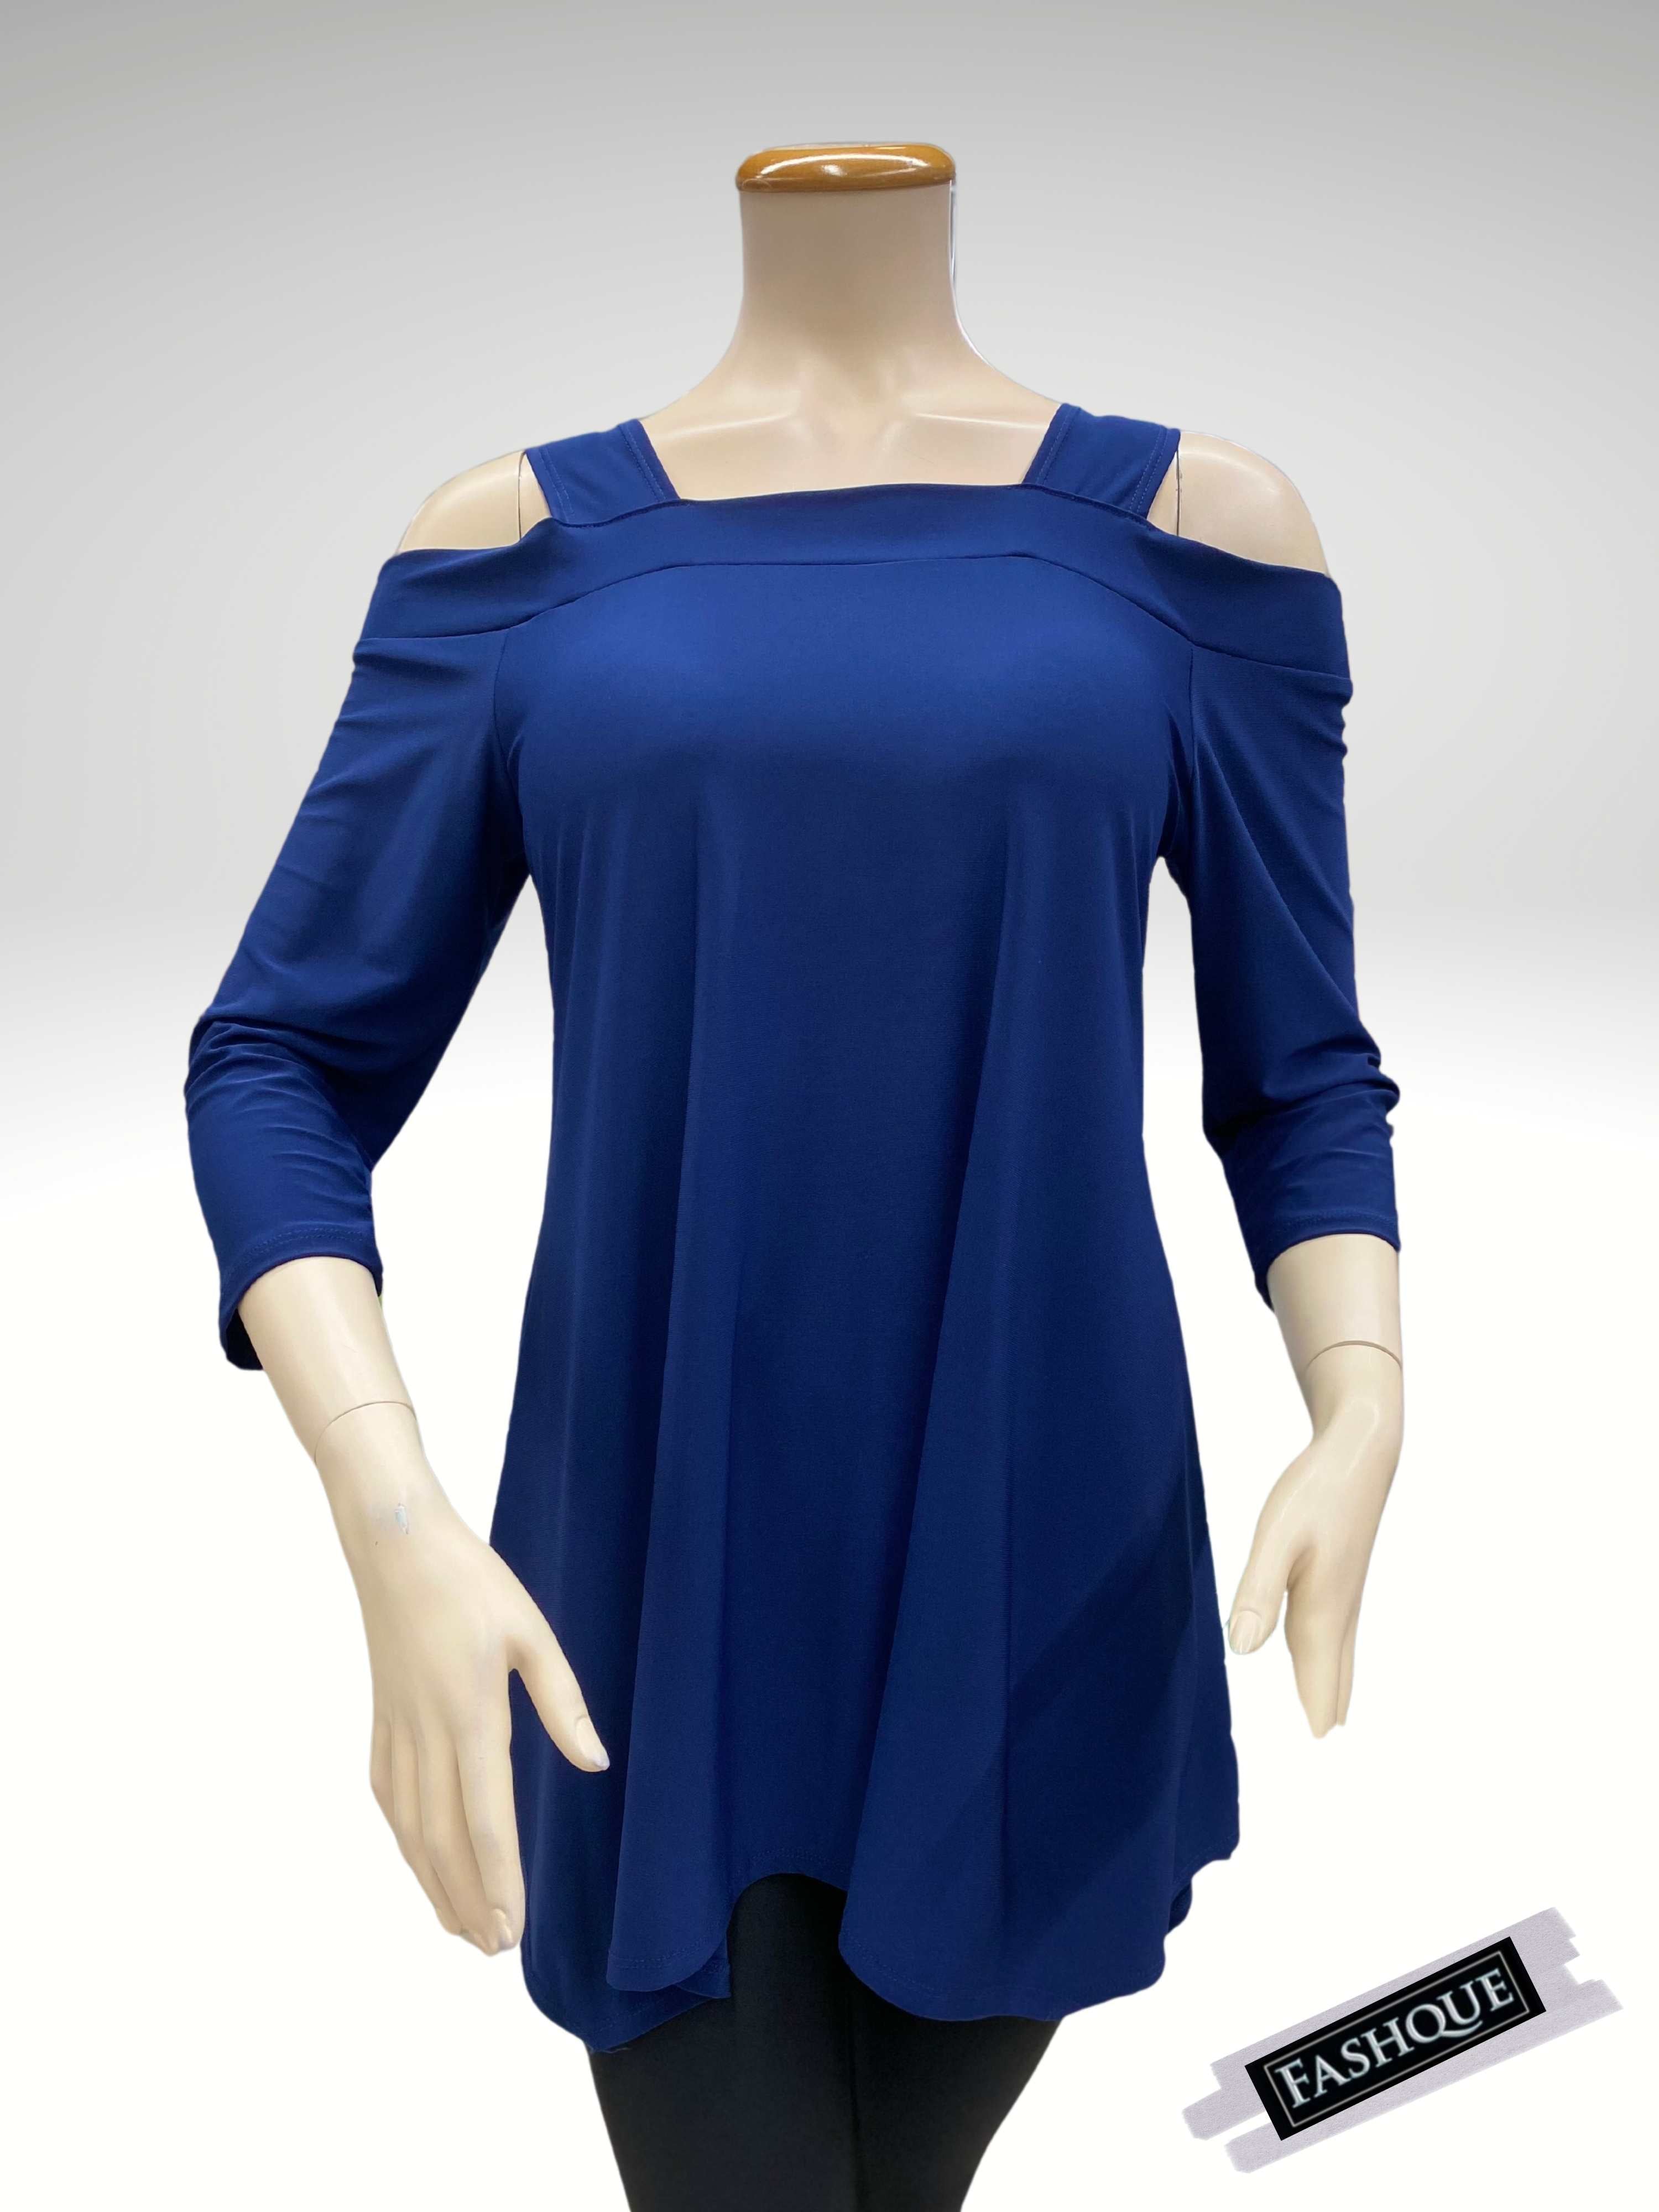 FASHQUE - Off shoulder 3/4 sleeve Asymmetrical Tunic/Top - T425